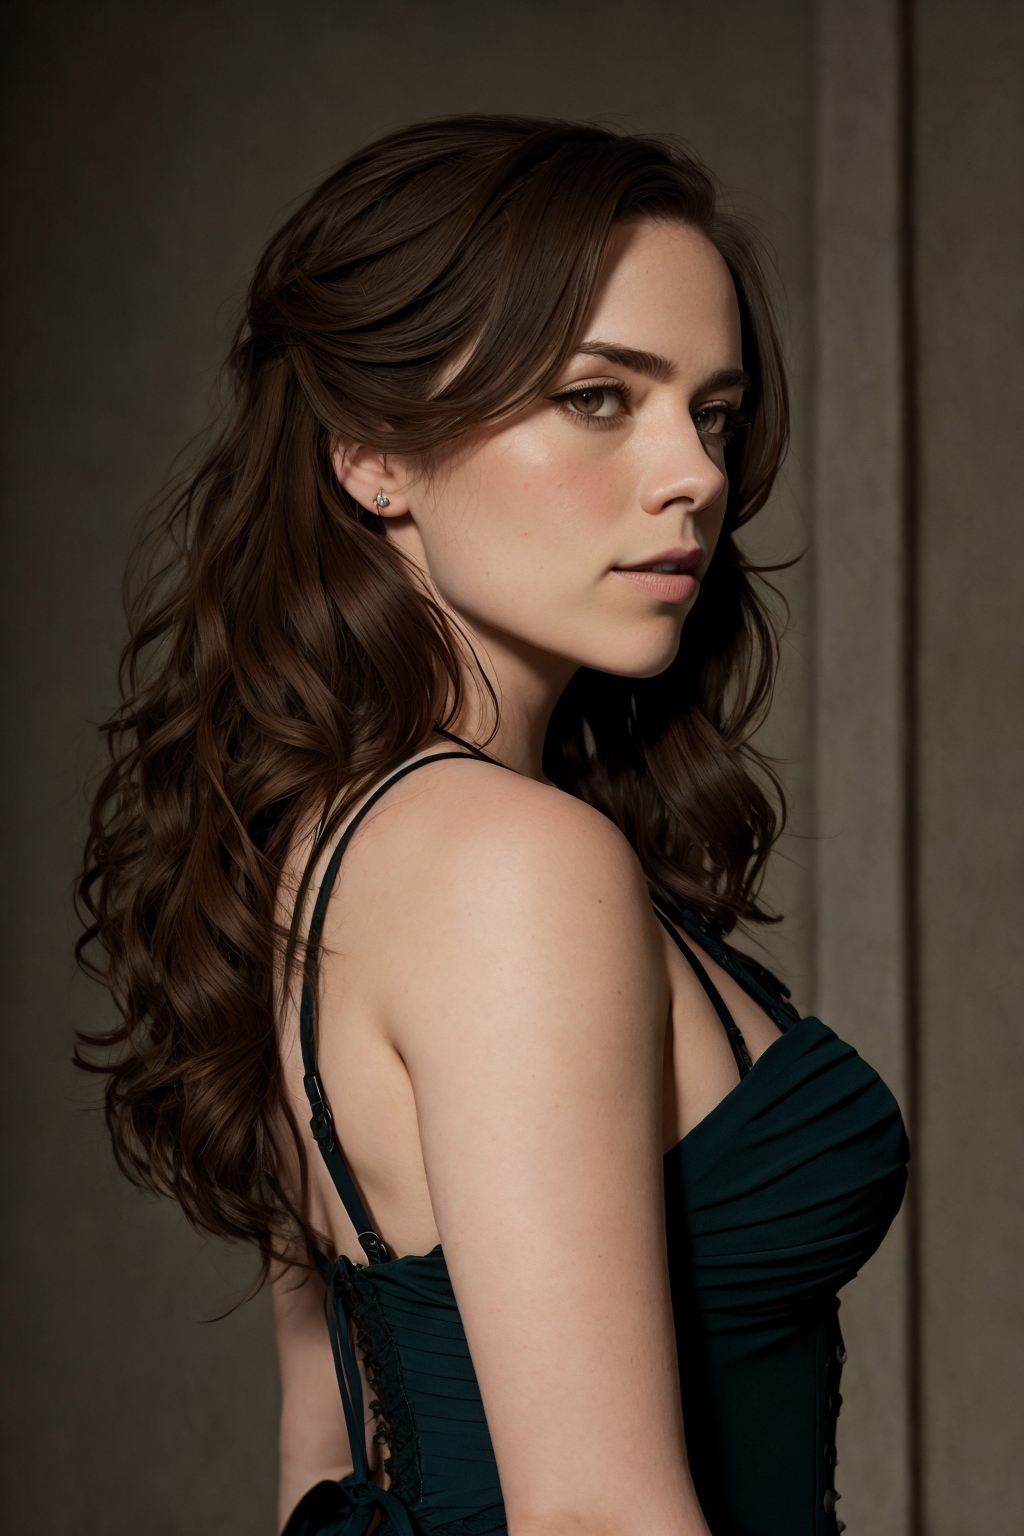 Hayley Atwell [Embedding] image by ngsm000